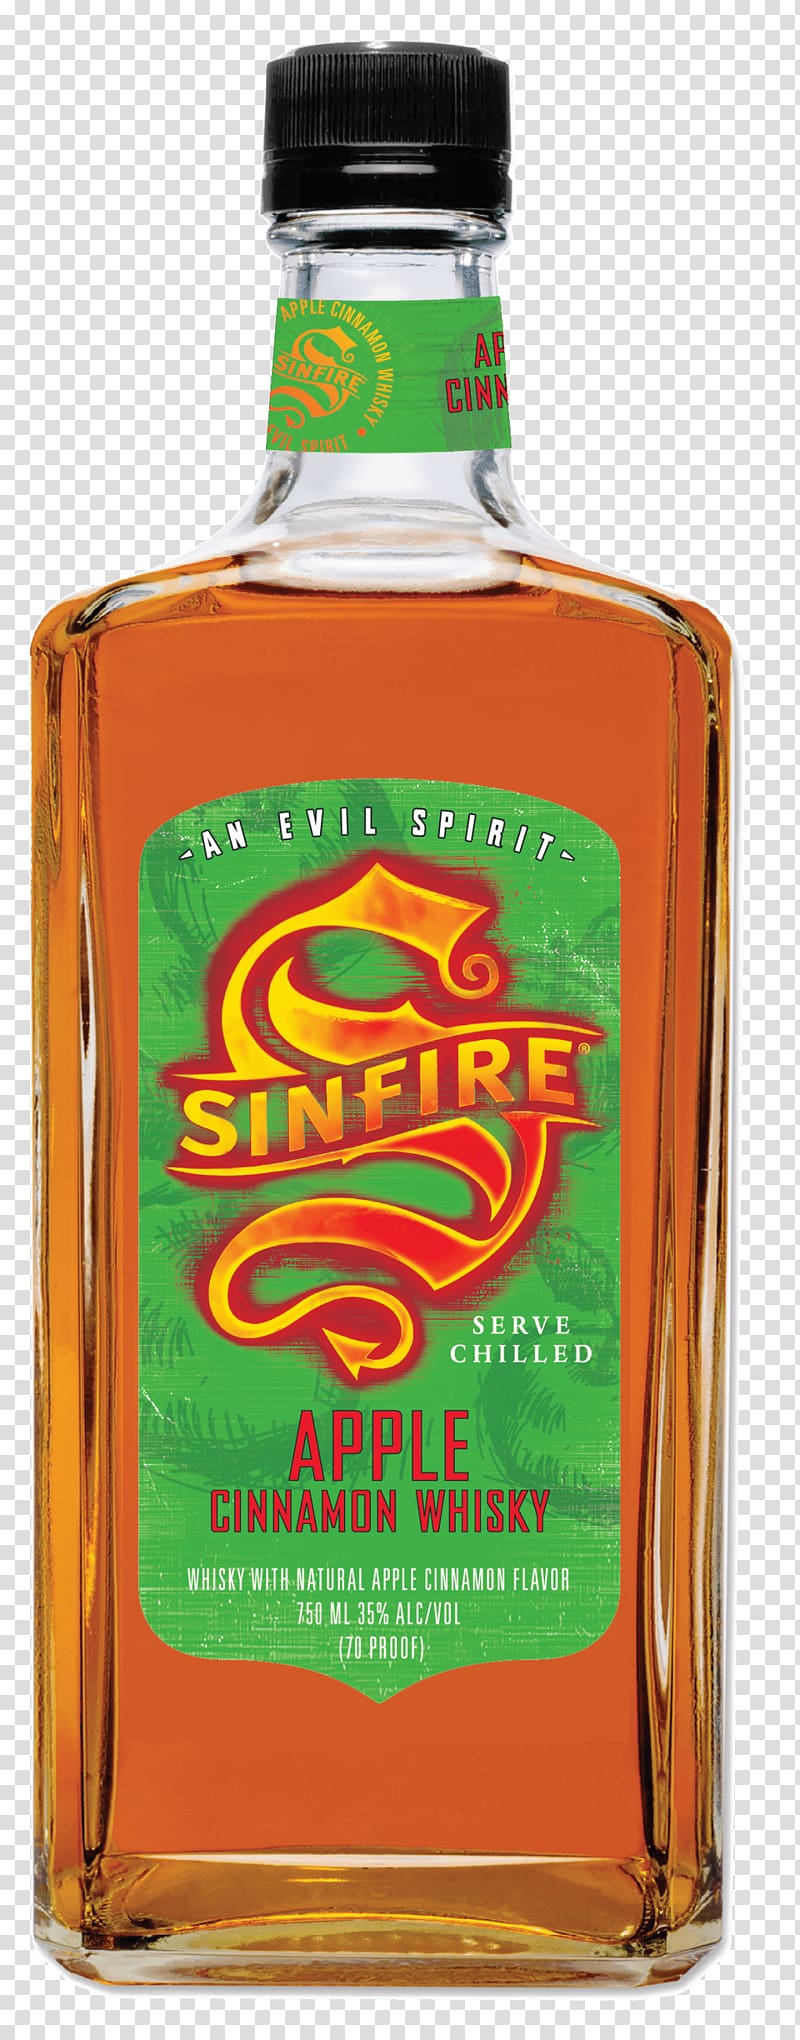 Whiskey Sinfire Fireball Cinnamon Whisky Distilled beverage Hood River, drink transparent background PNG clipart